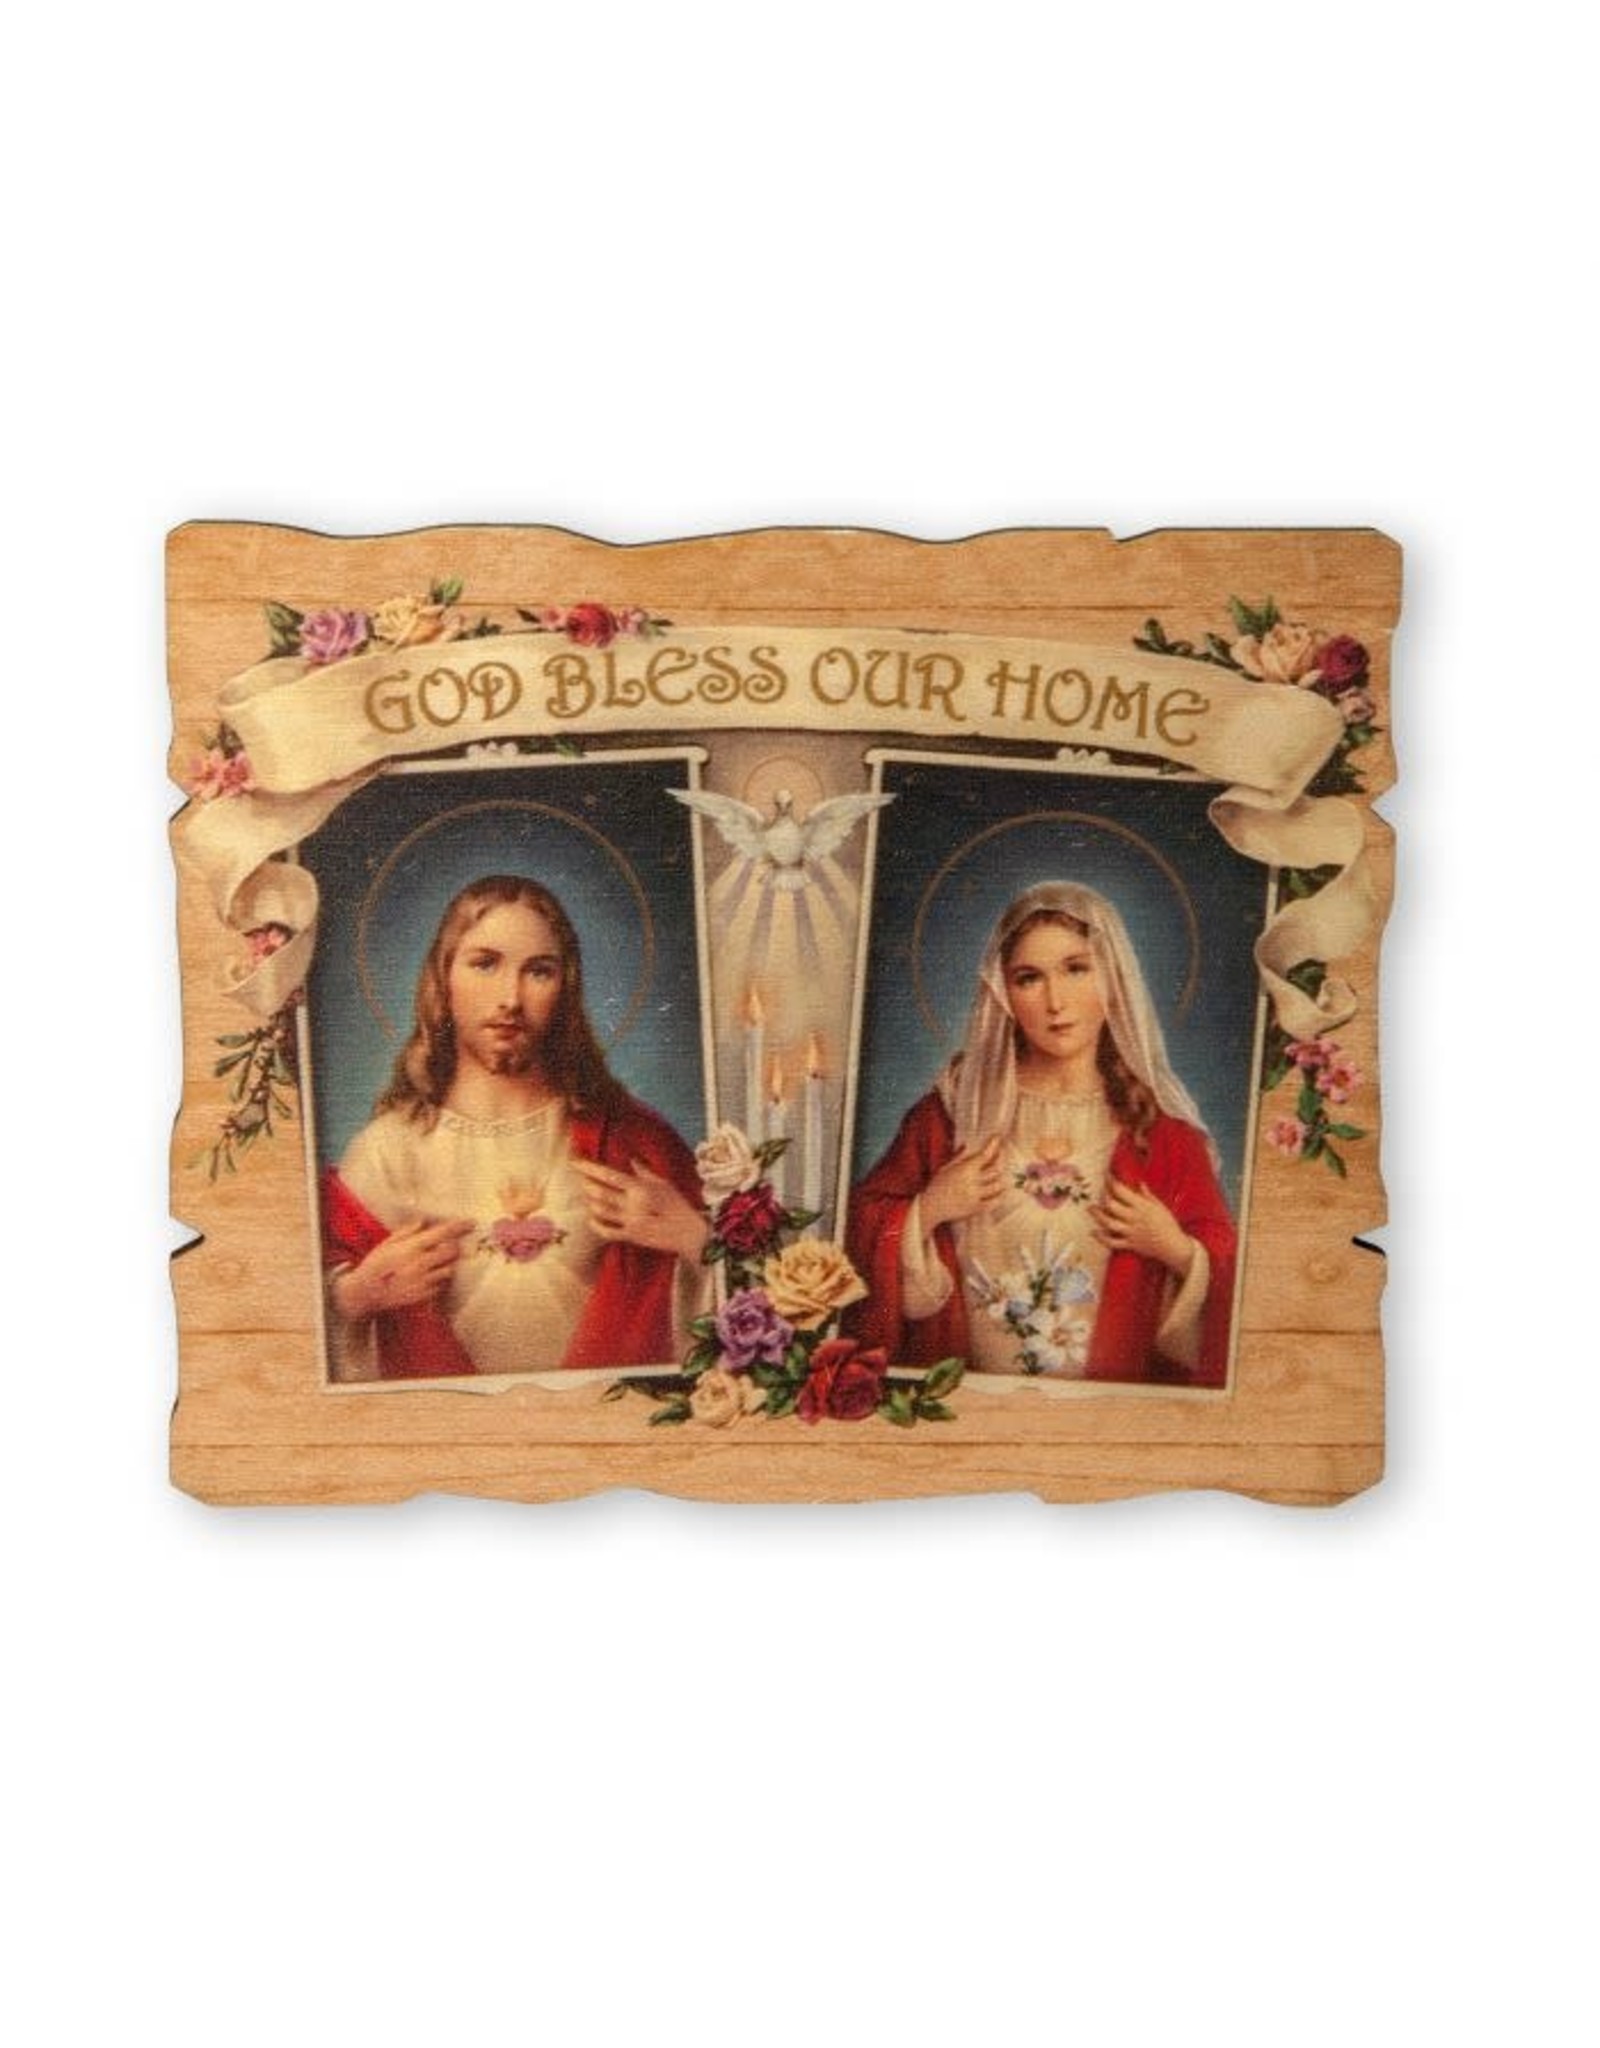 Hirten God Bless Our Home, Sacred & Immaculate Hearts Vintage Barn Plaque